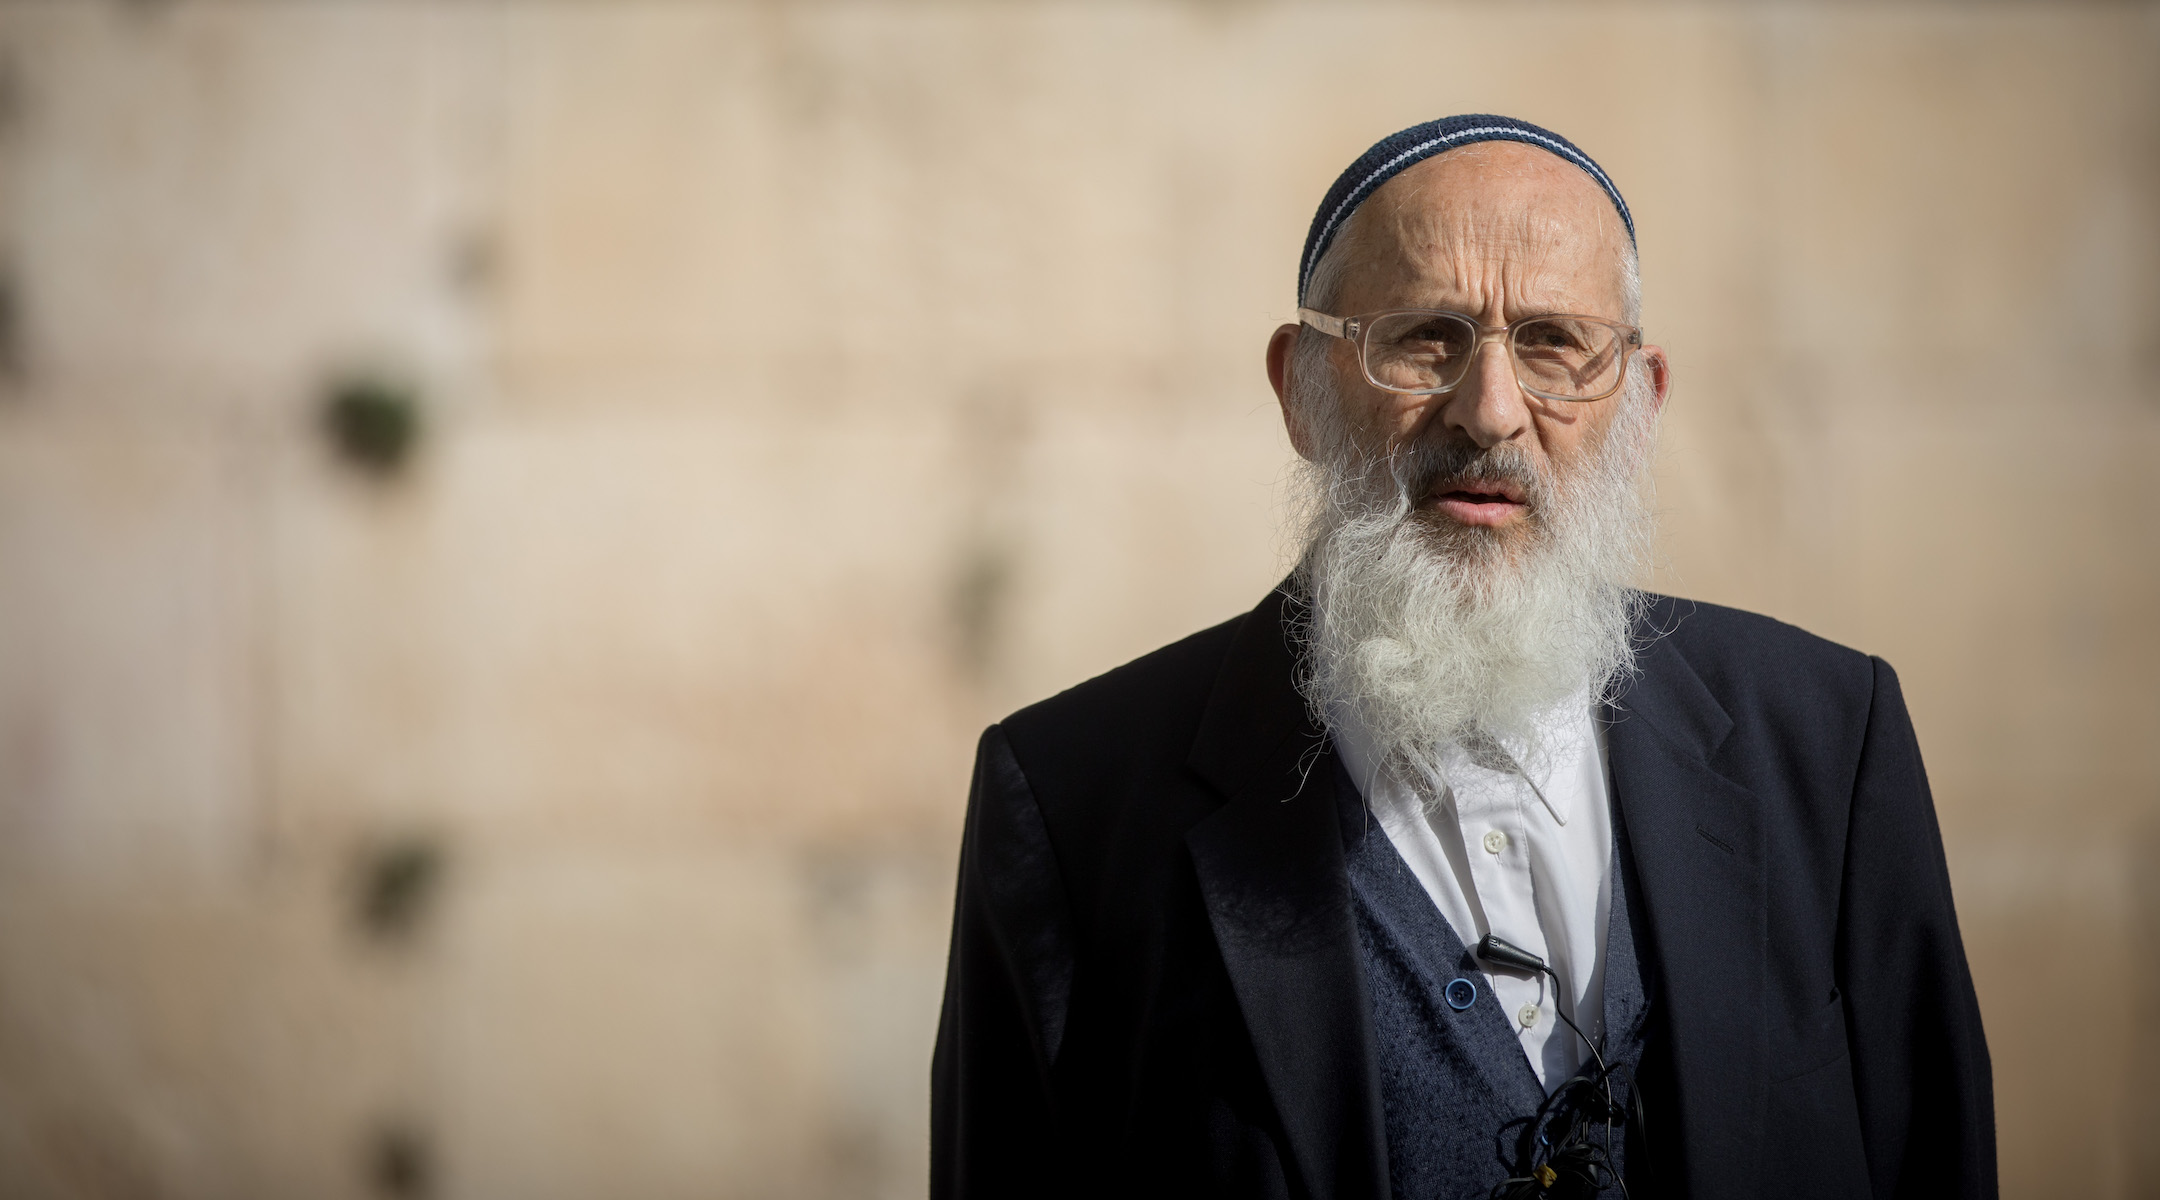 Rabbi Shlomo Aviner, head of the Ateret Cohanim yeshiva delivers a special torah lesson at the mixed-gender prayer section at the Western Wall in Jerusalem's Old City on January 3, 2018 (Yonatan Sindel/Flash90)